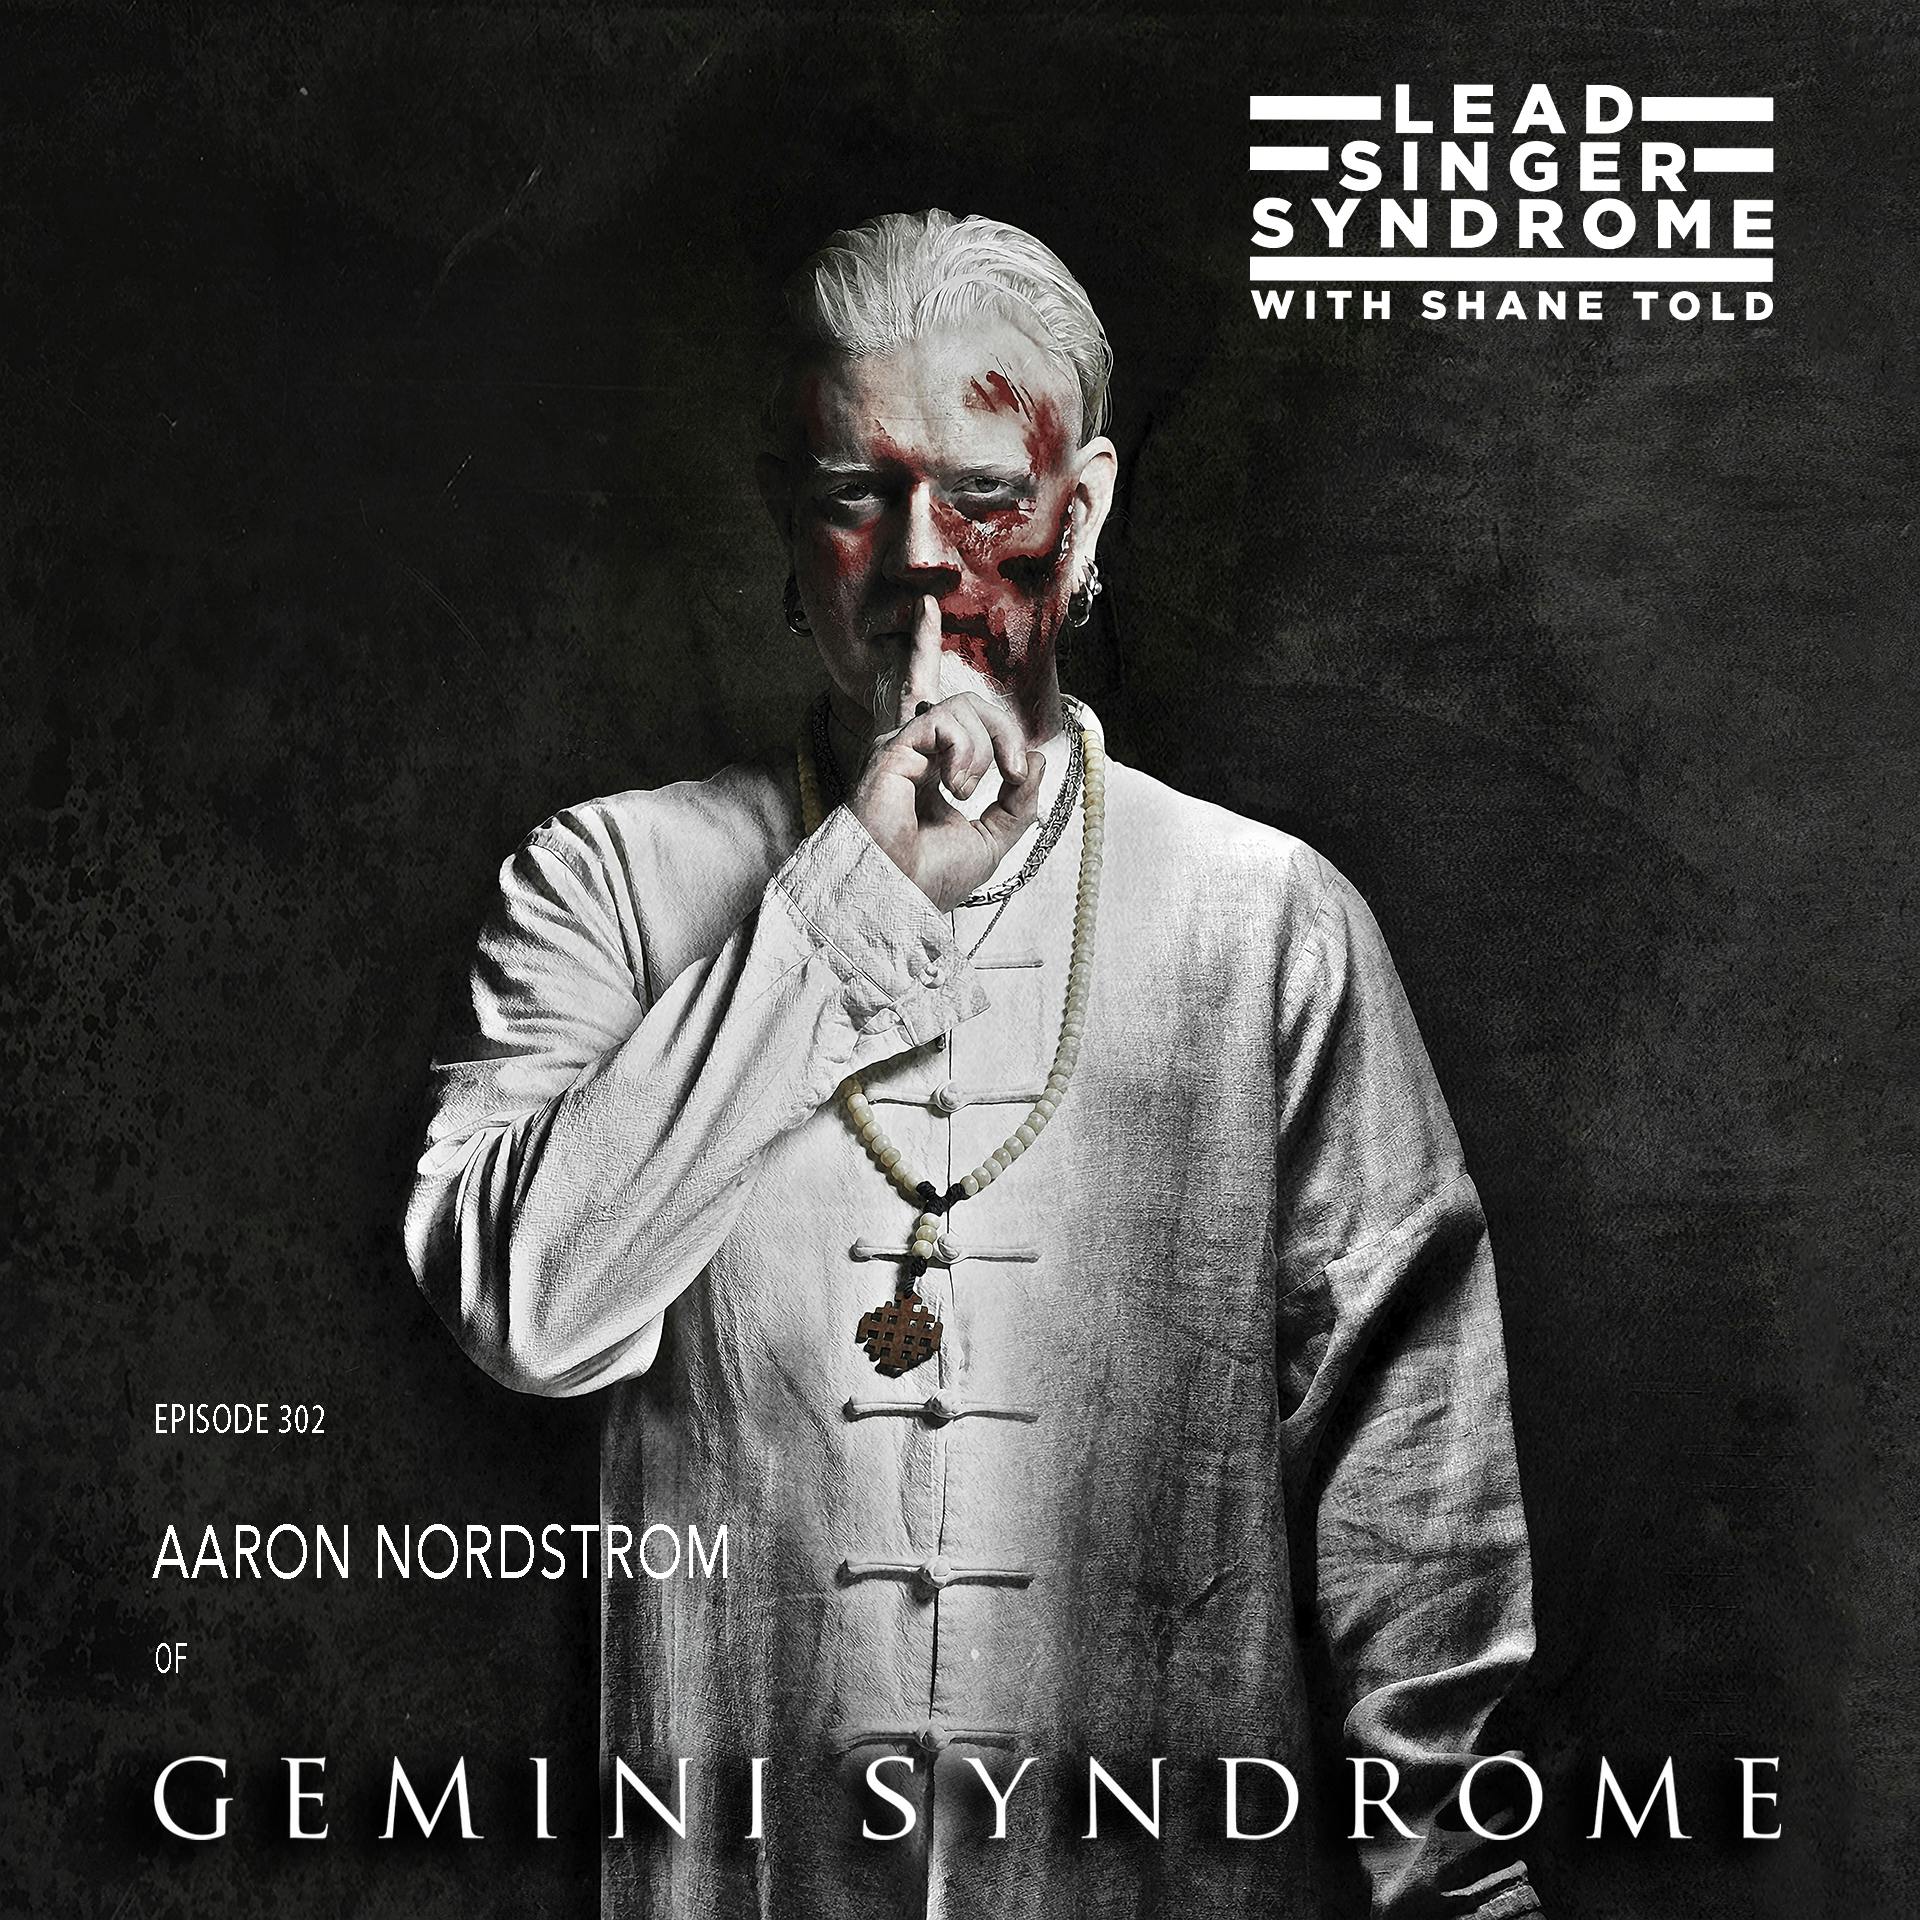 Aaron Nordstrom (Gemini Syndrome)